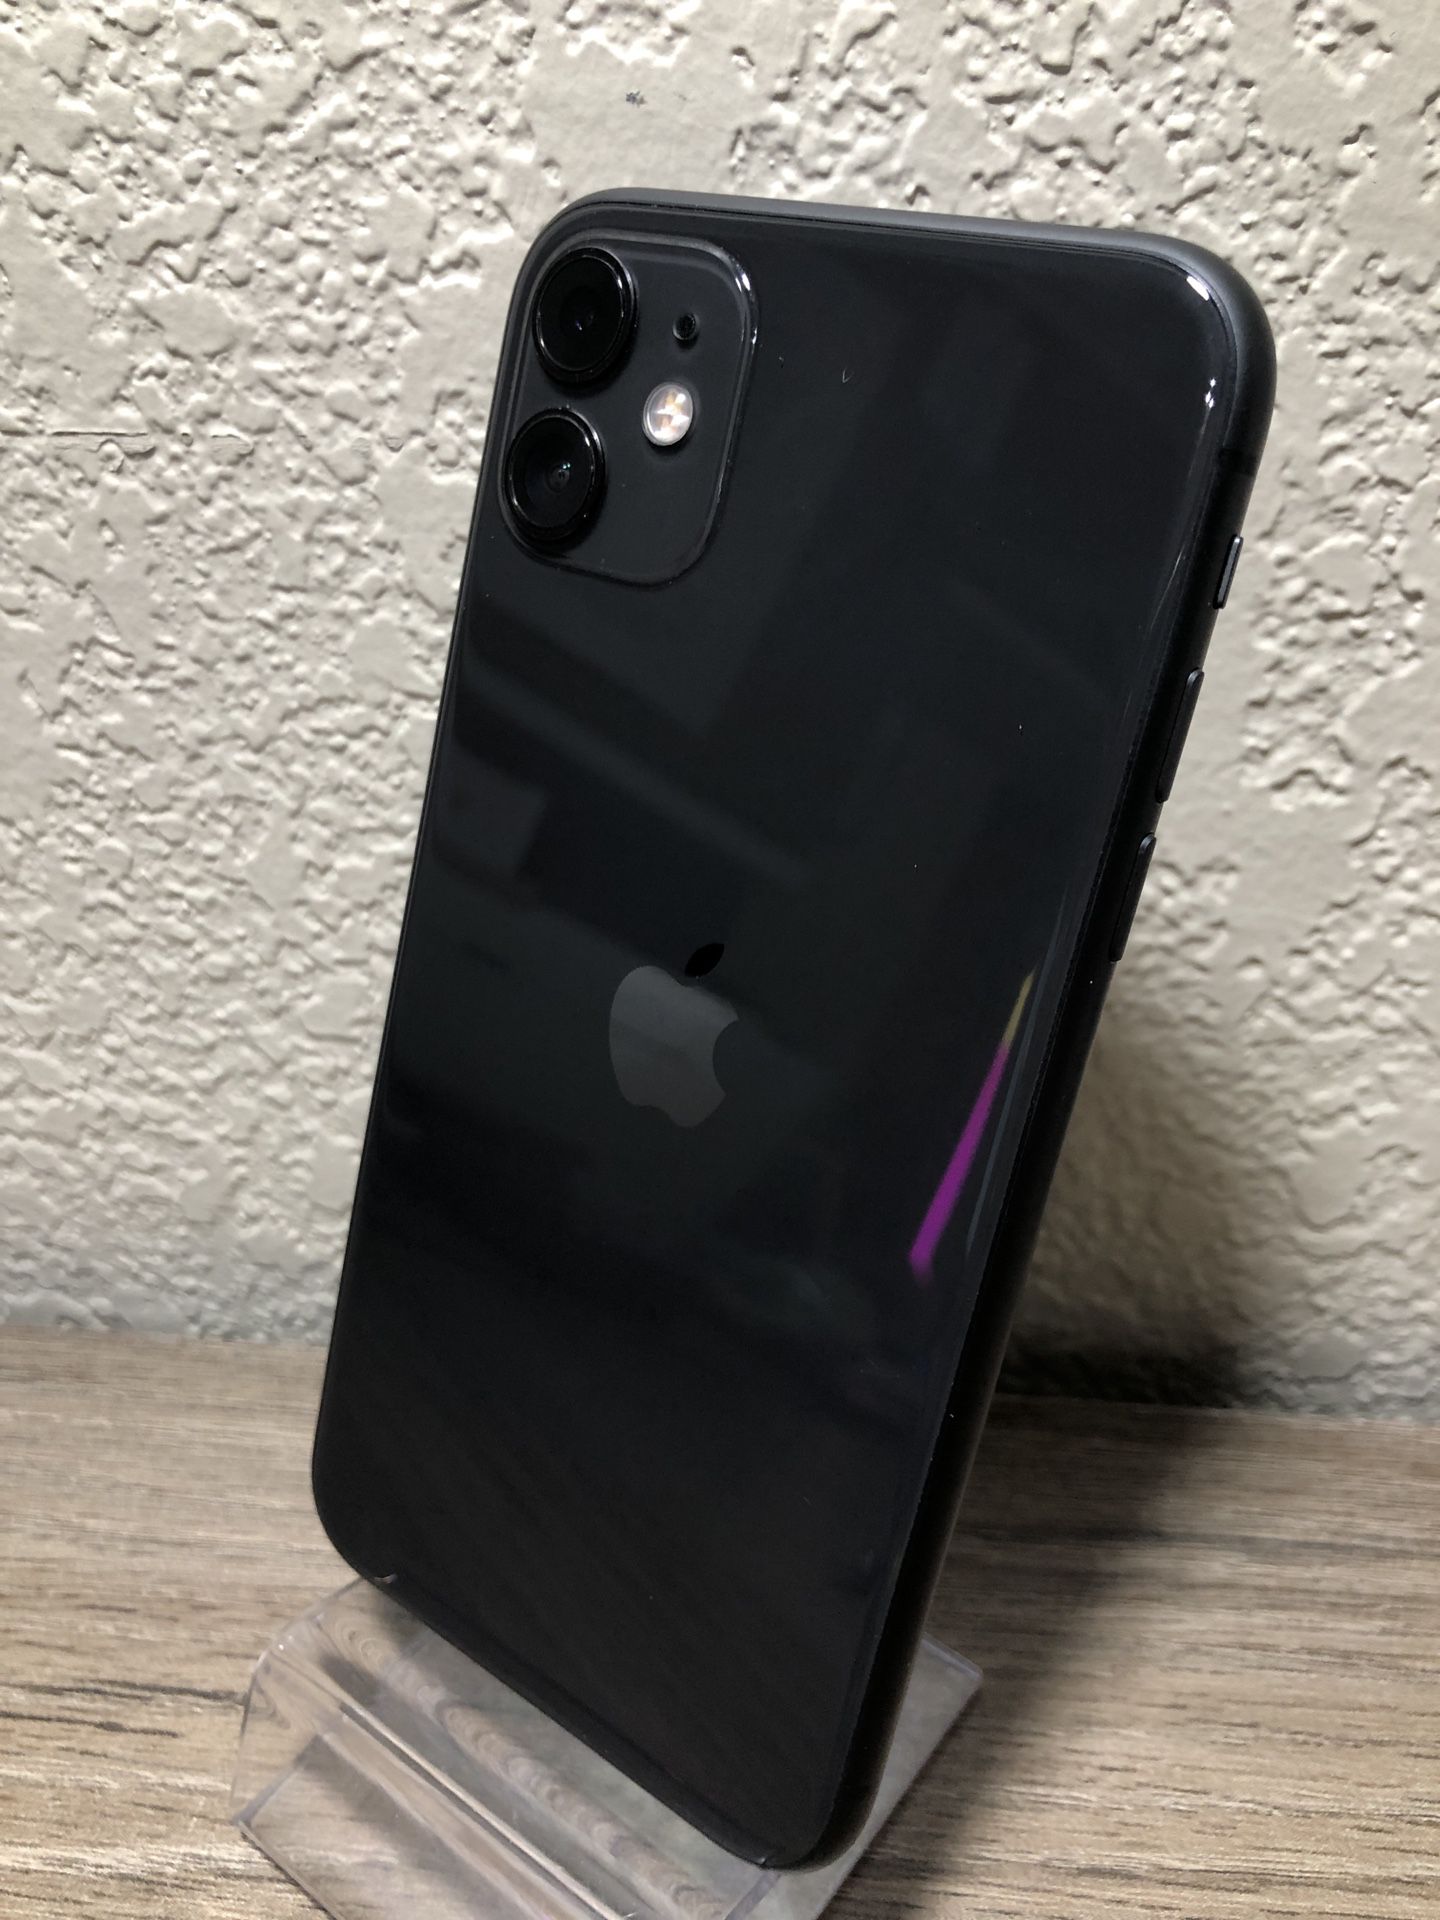 iPhone 11 64gb T-mobile and Metro PCS carrier. IMEI clean, iCloud unlocked. Screen has been replaced